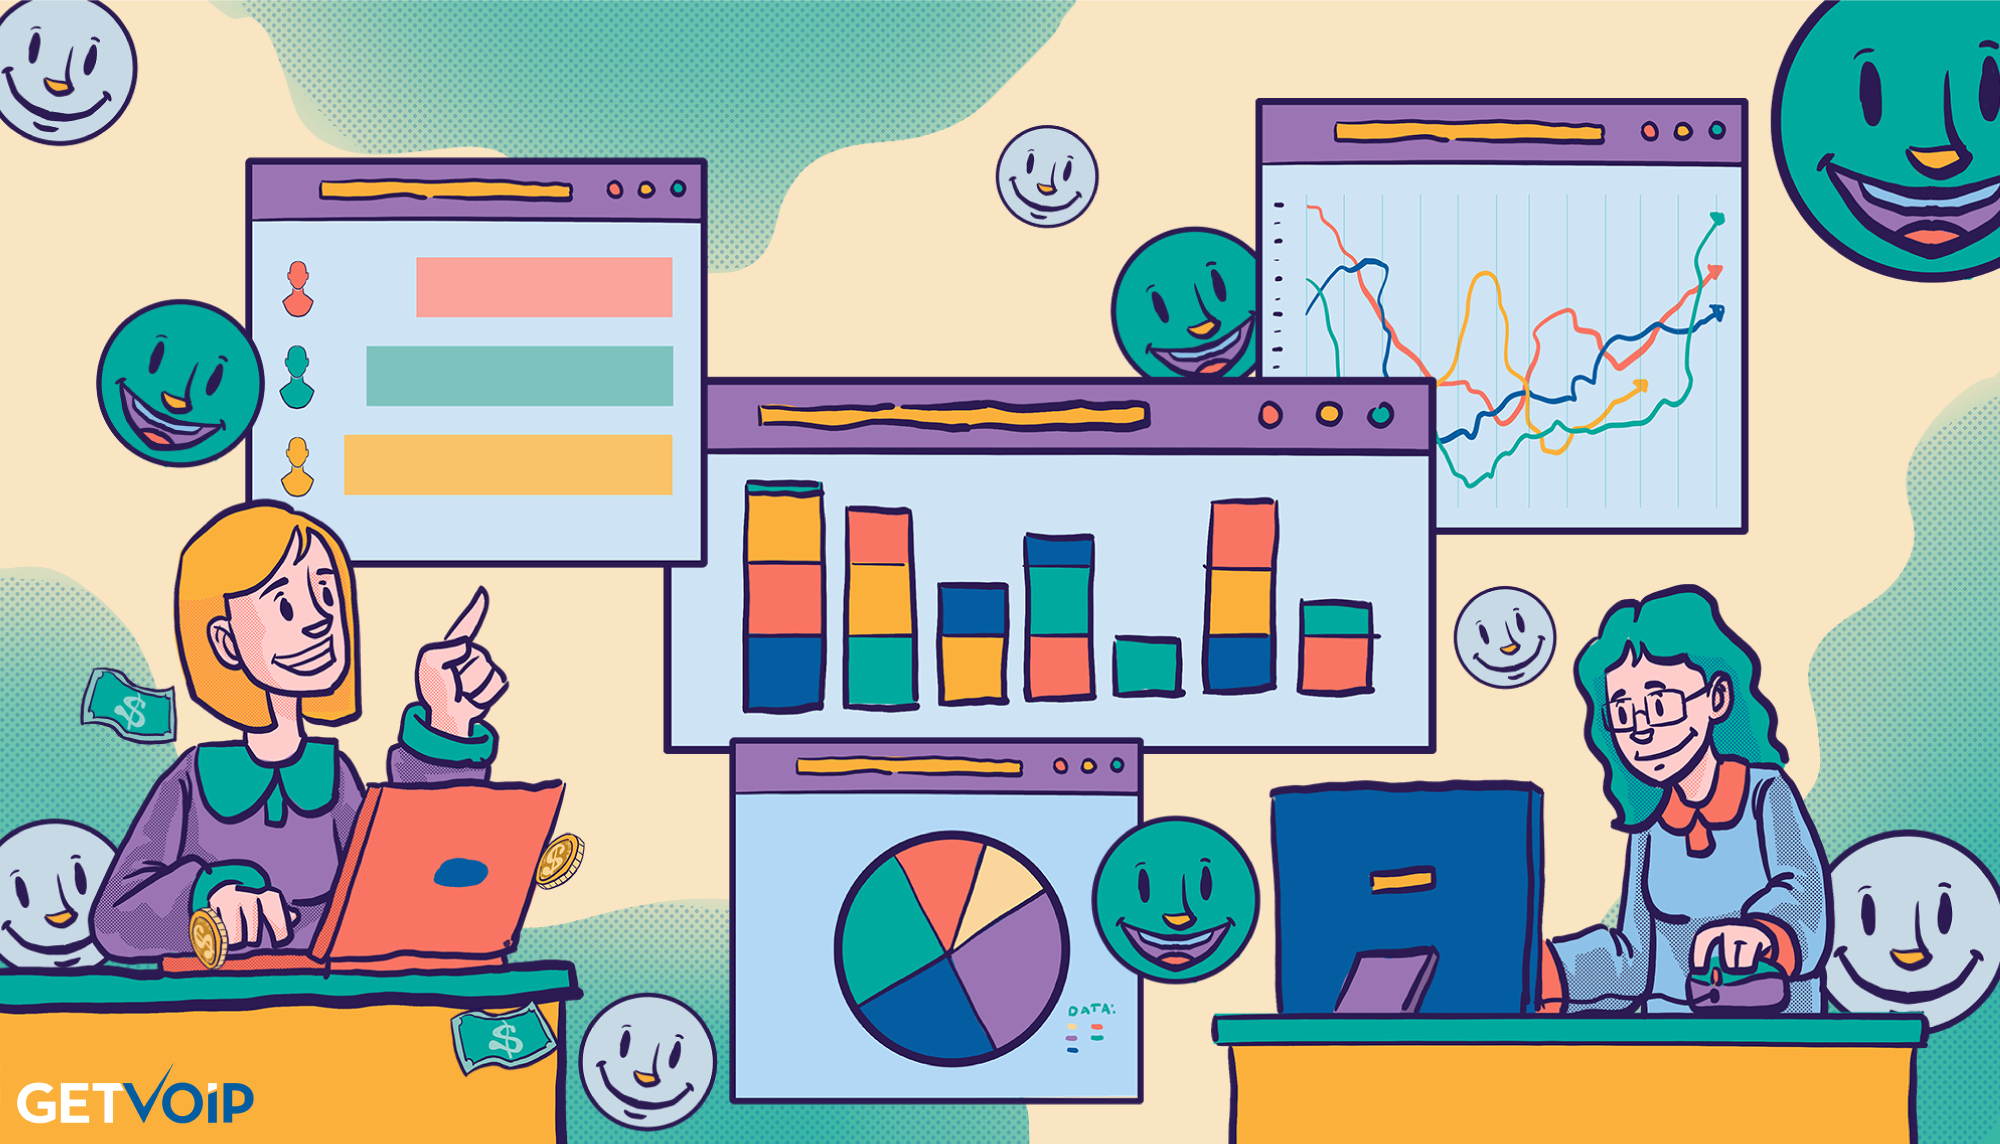 20 Customer Service Metrics You Should Be Monitoring Closely in 2022